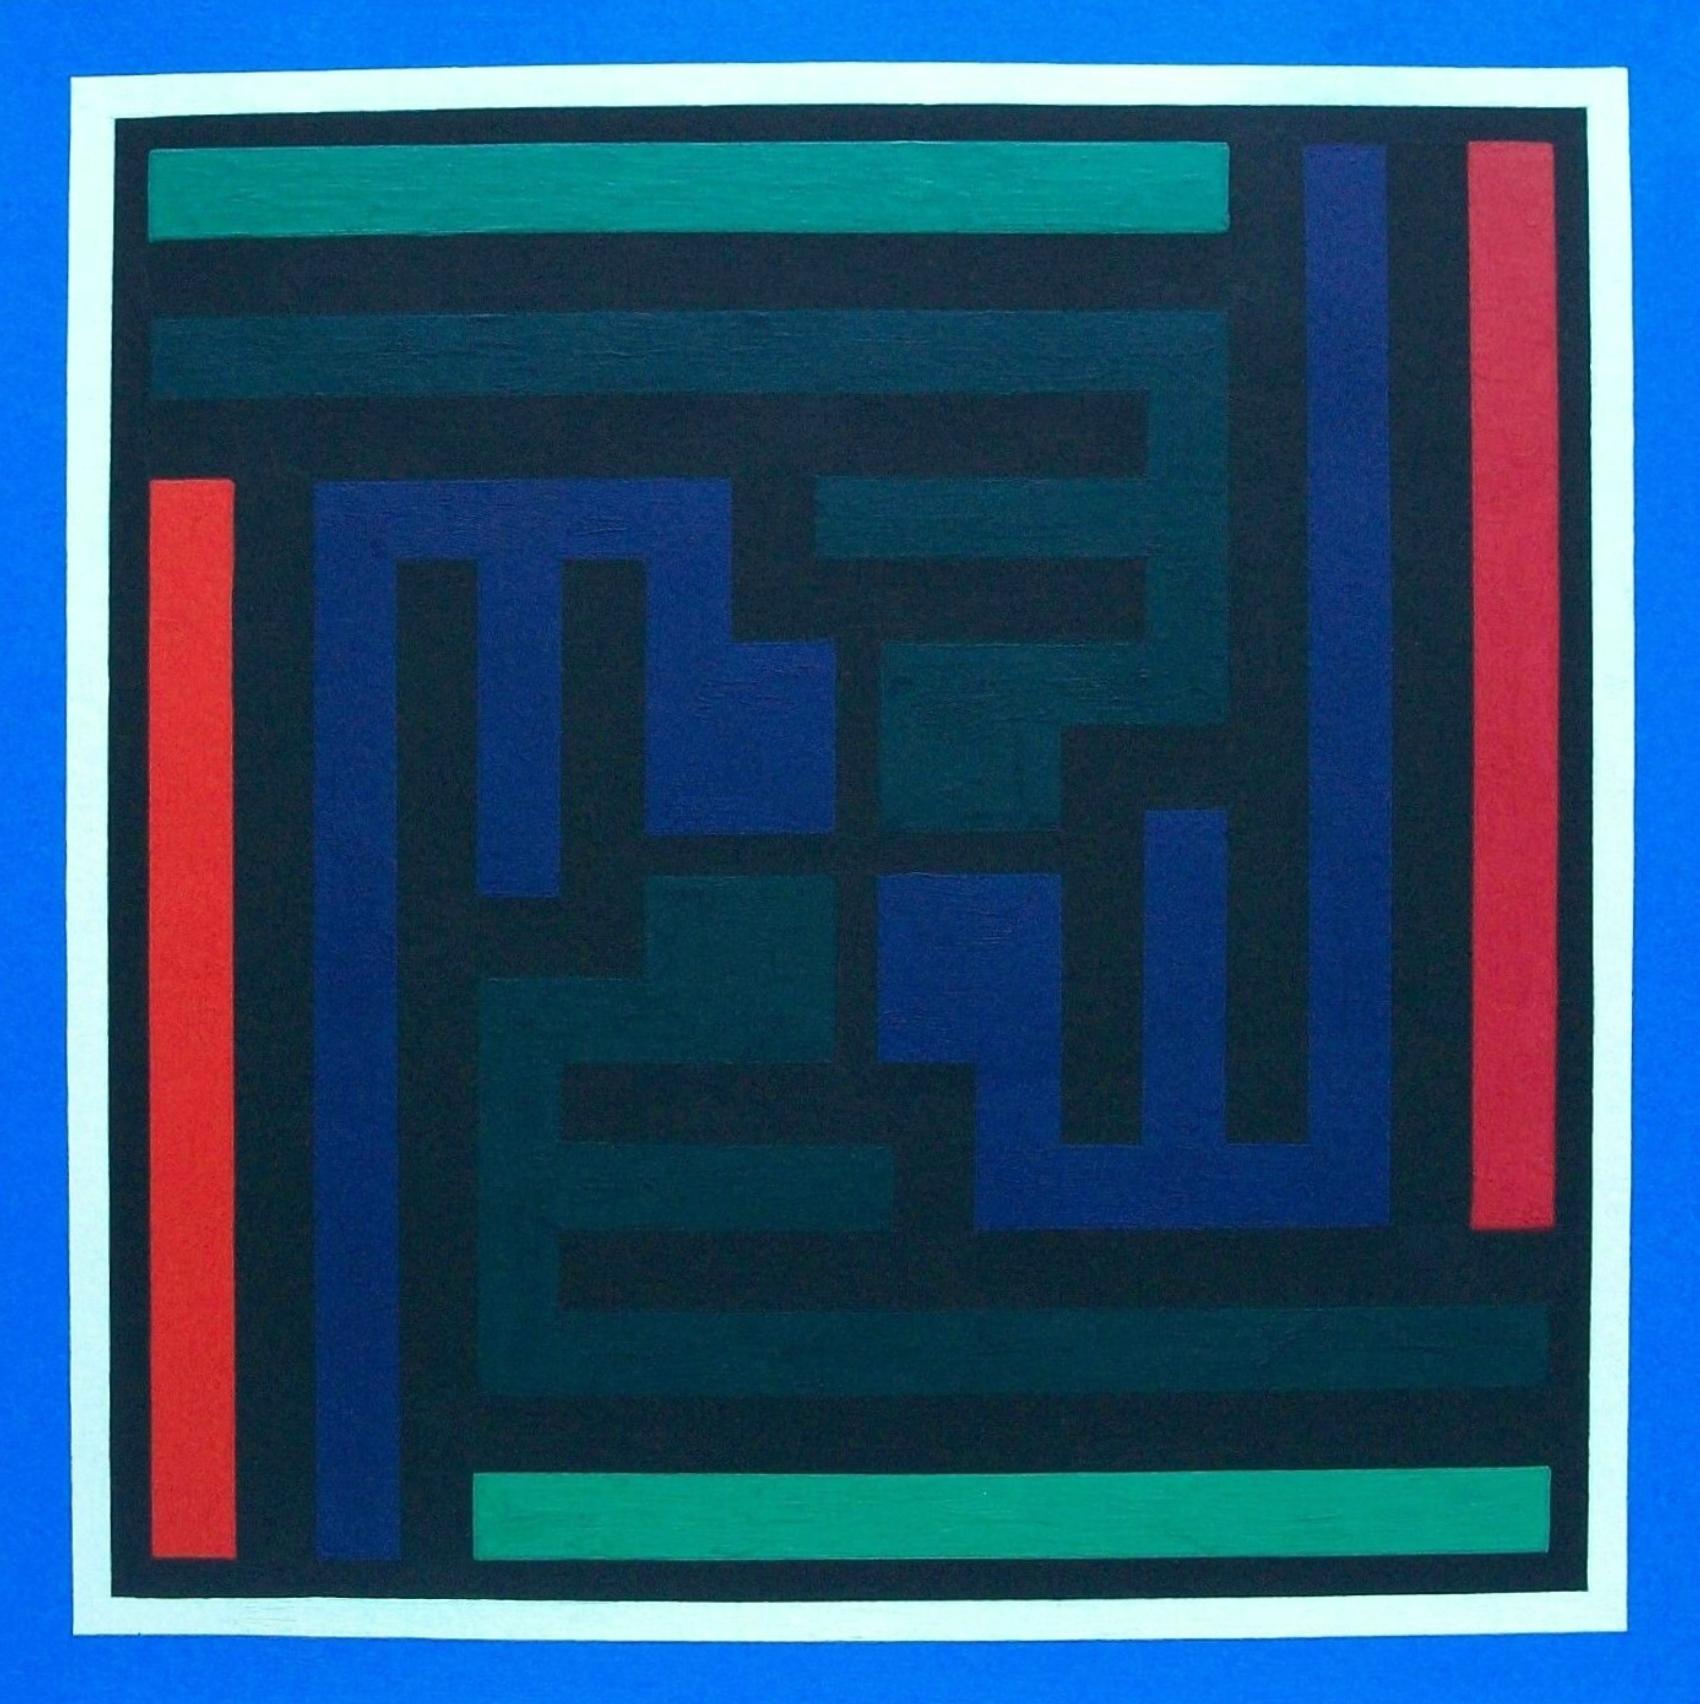 MUIN HASAN - 'Allah' - Mid-Century Modern gouache painting on watercolor paper - extraordinary quality and composition - signed/titled and dated - unframed - Canada - circa 1977.

Excellent condition - no loss - no damage - no restoration - ready